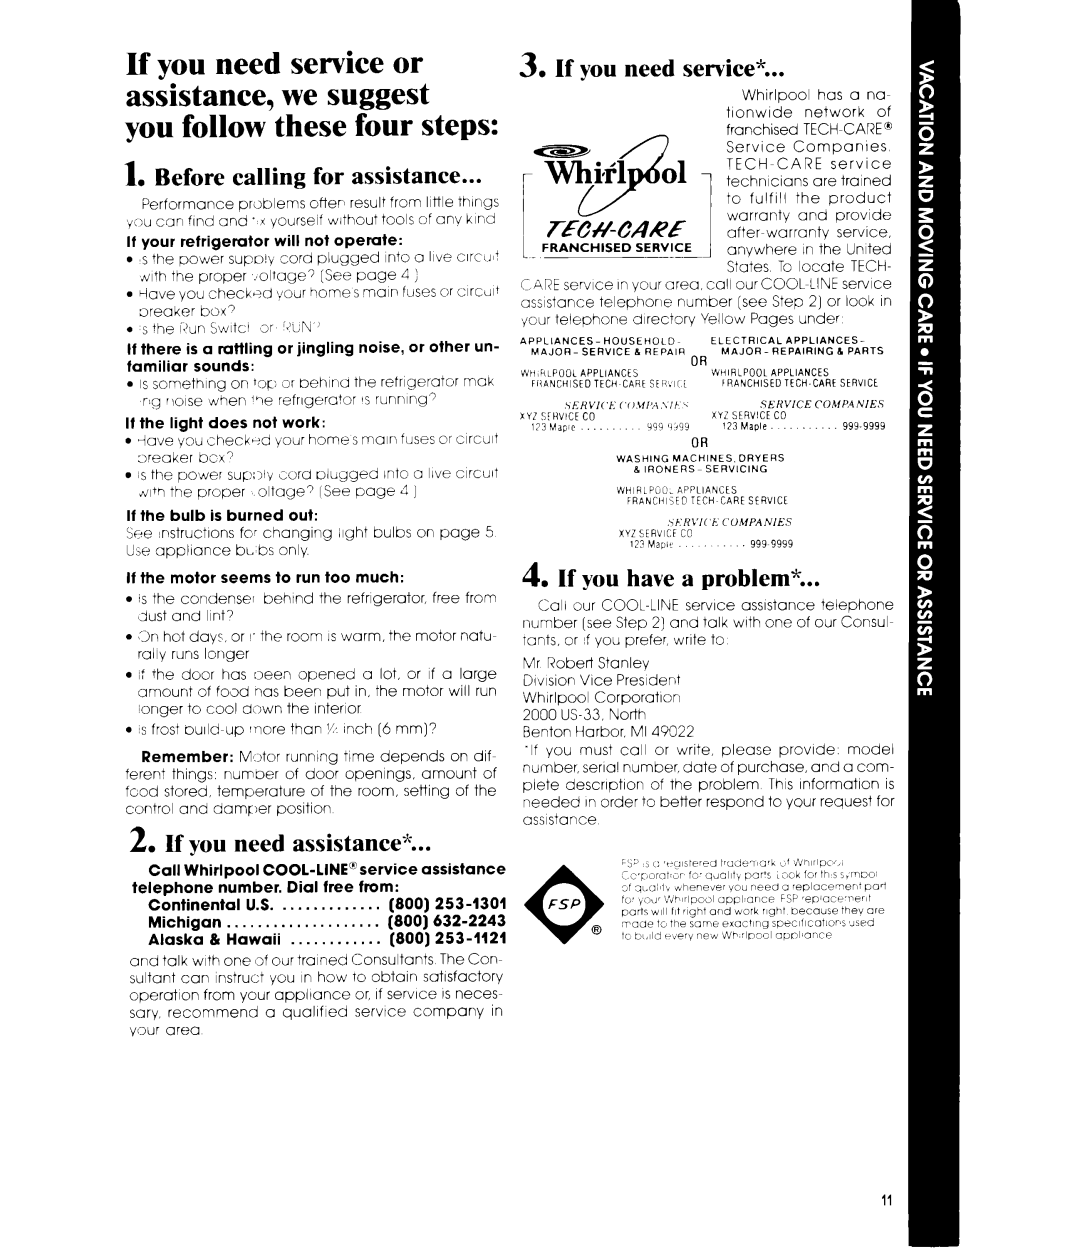 Whirlpool EL15CC manual Before calling for assistance, If you need assistance, If you need service, If you have a problem 